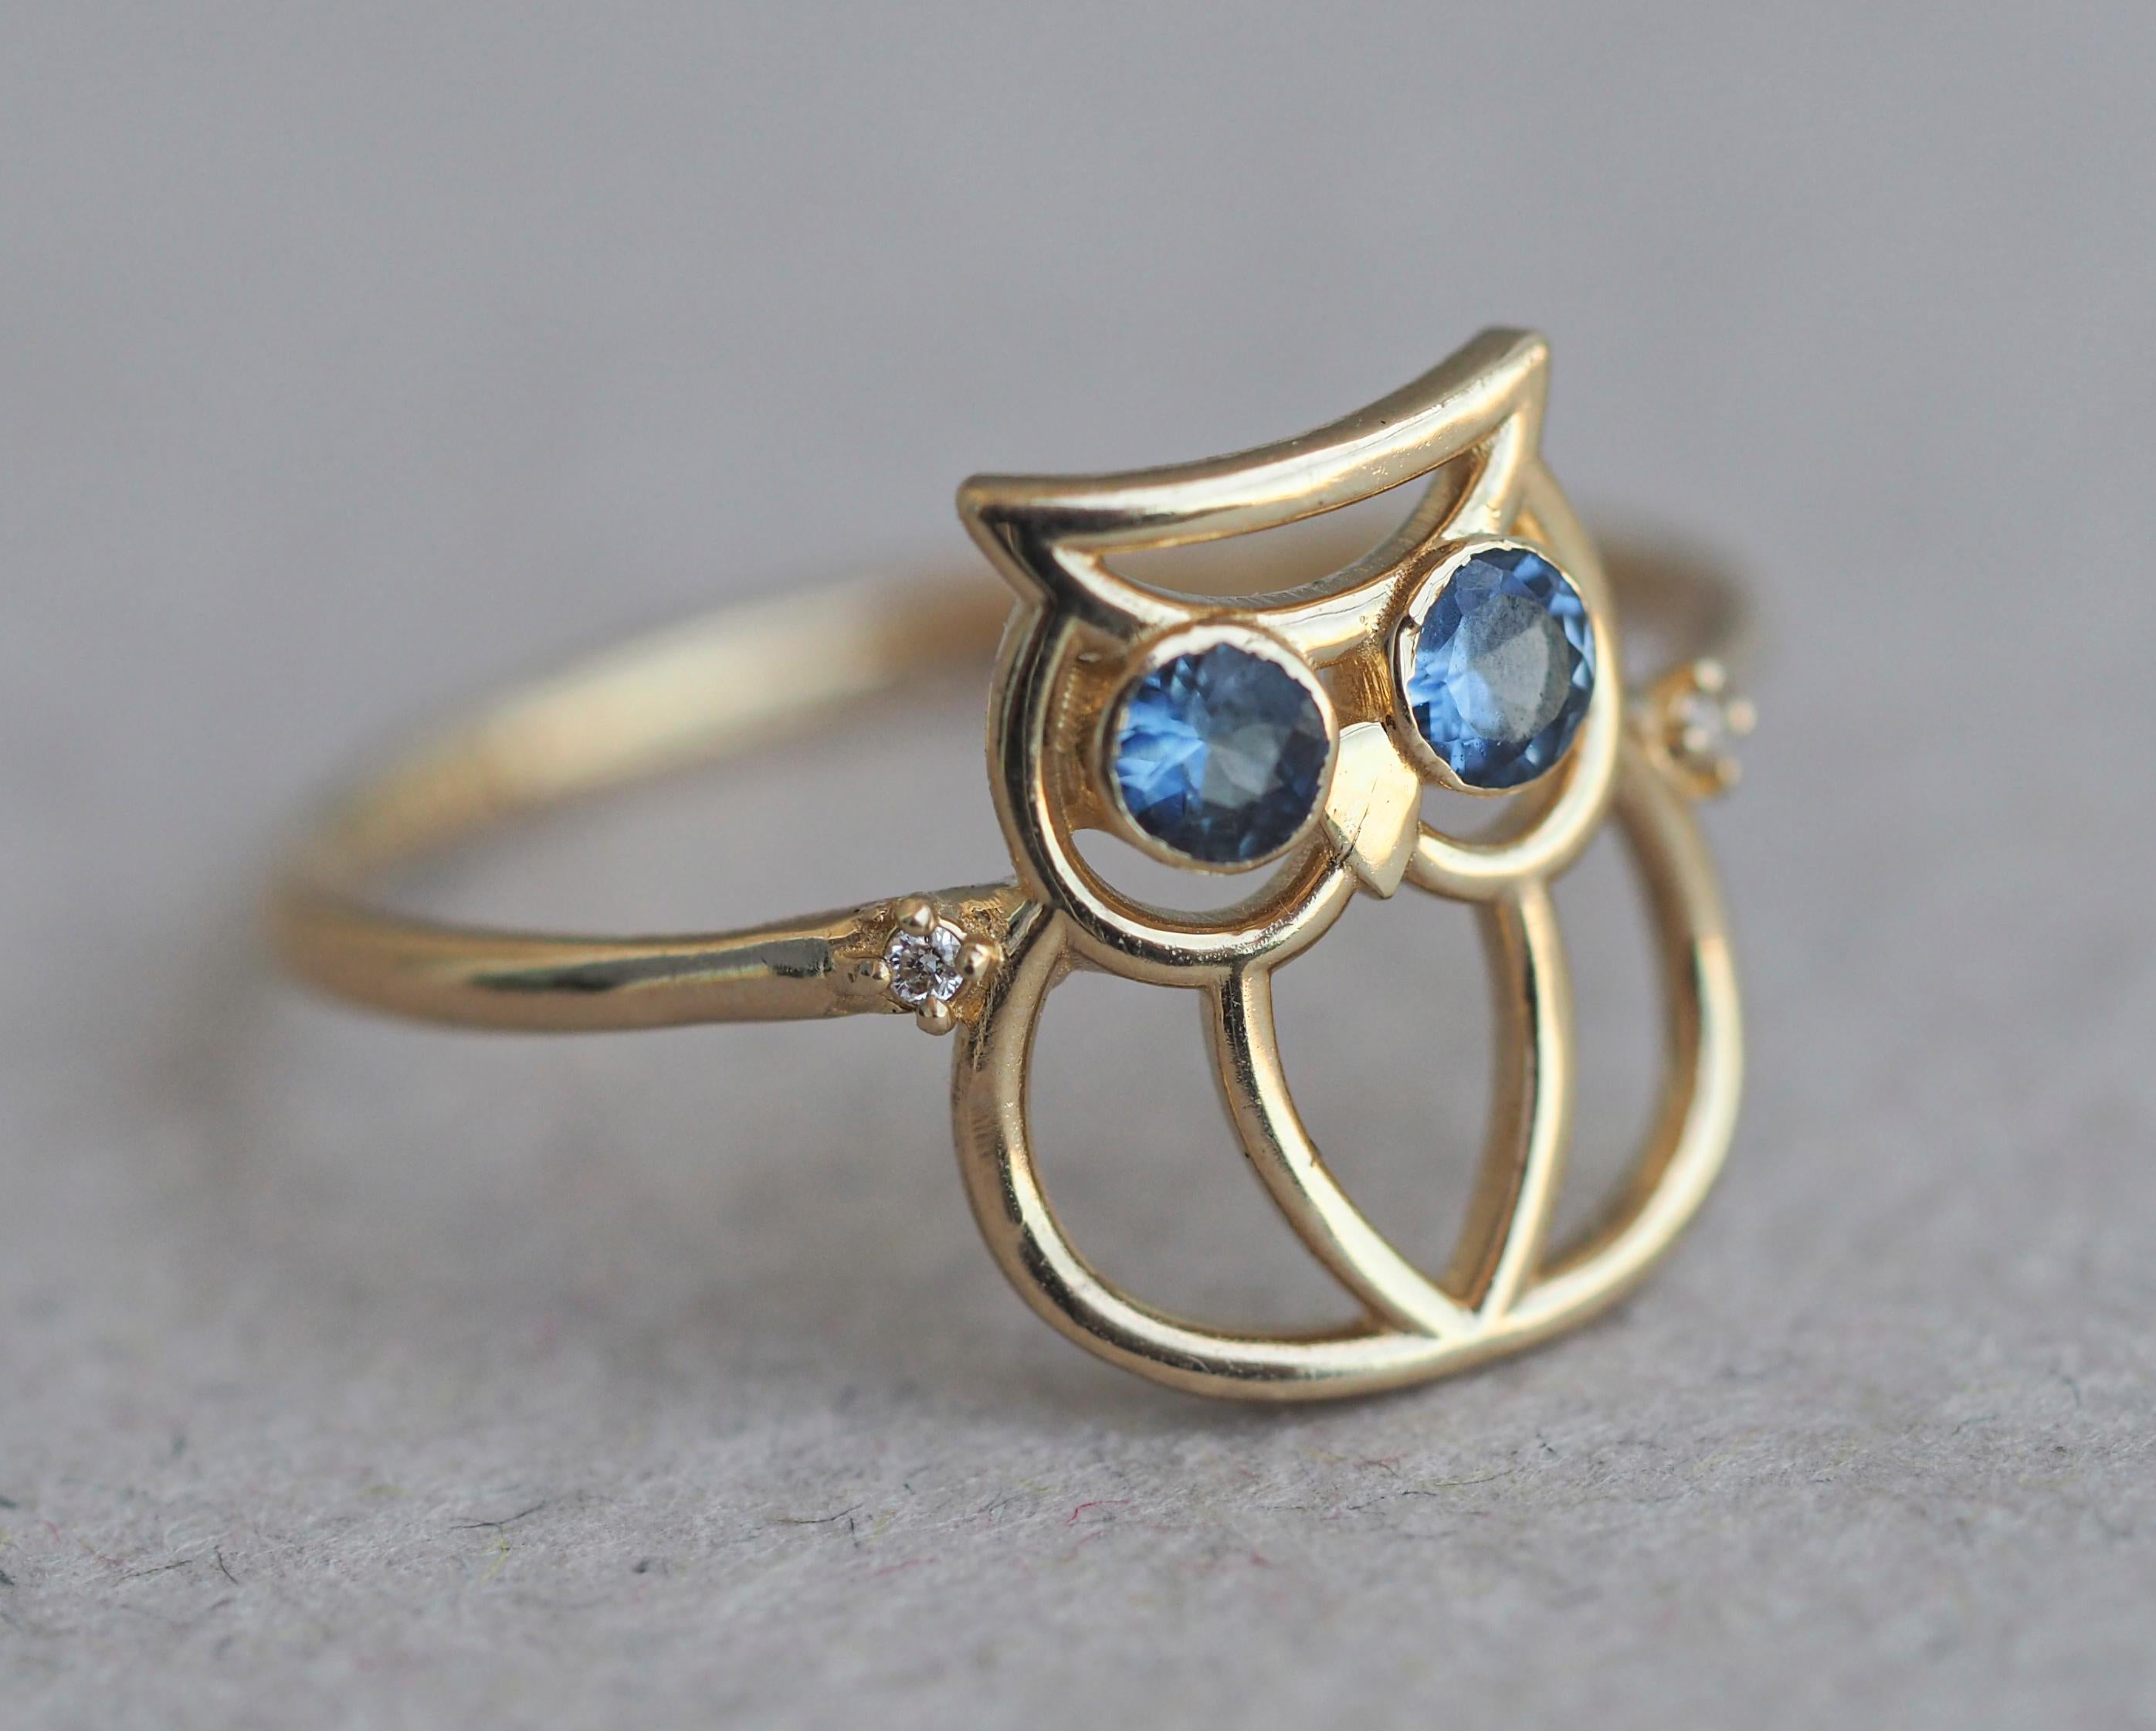 Owl Ring with tanzanites 14k gold. 
Tiny Owl ring. December Birthstone ring. Round Tanzanite Ring. Tanzanite Promise Ring. Gold Owl Ring.

Metal - 14k gold
Weight - 1.3 gr. depends from size.

Gemstones:
2 tanzanites, round cut, blue color,